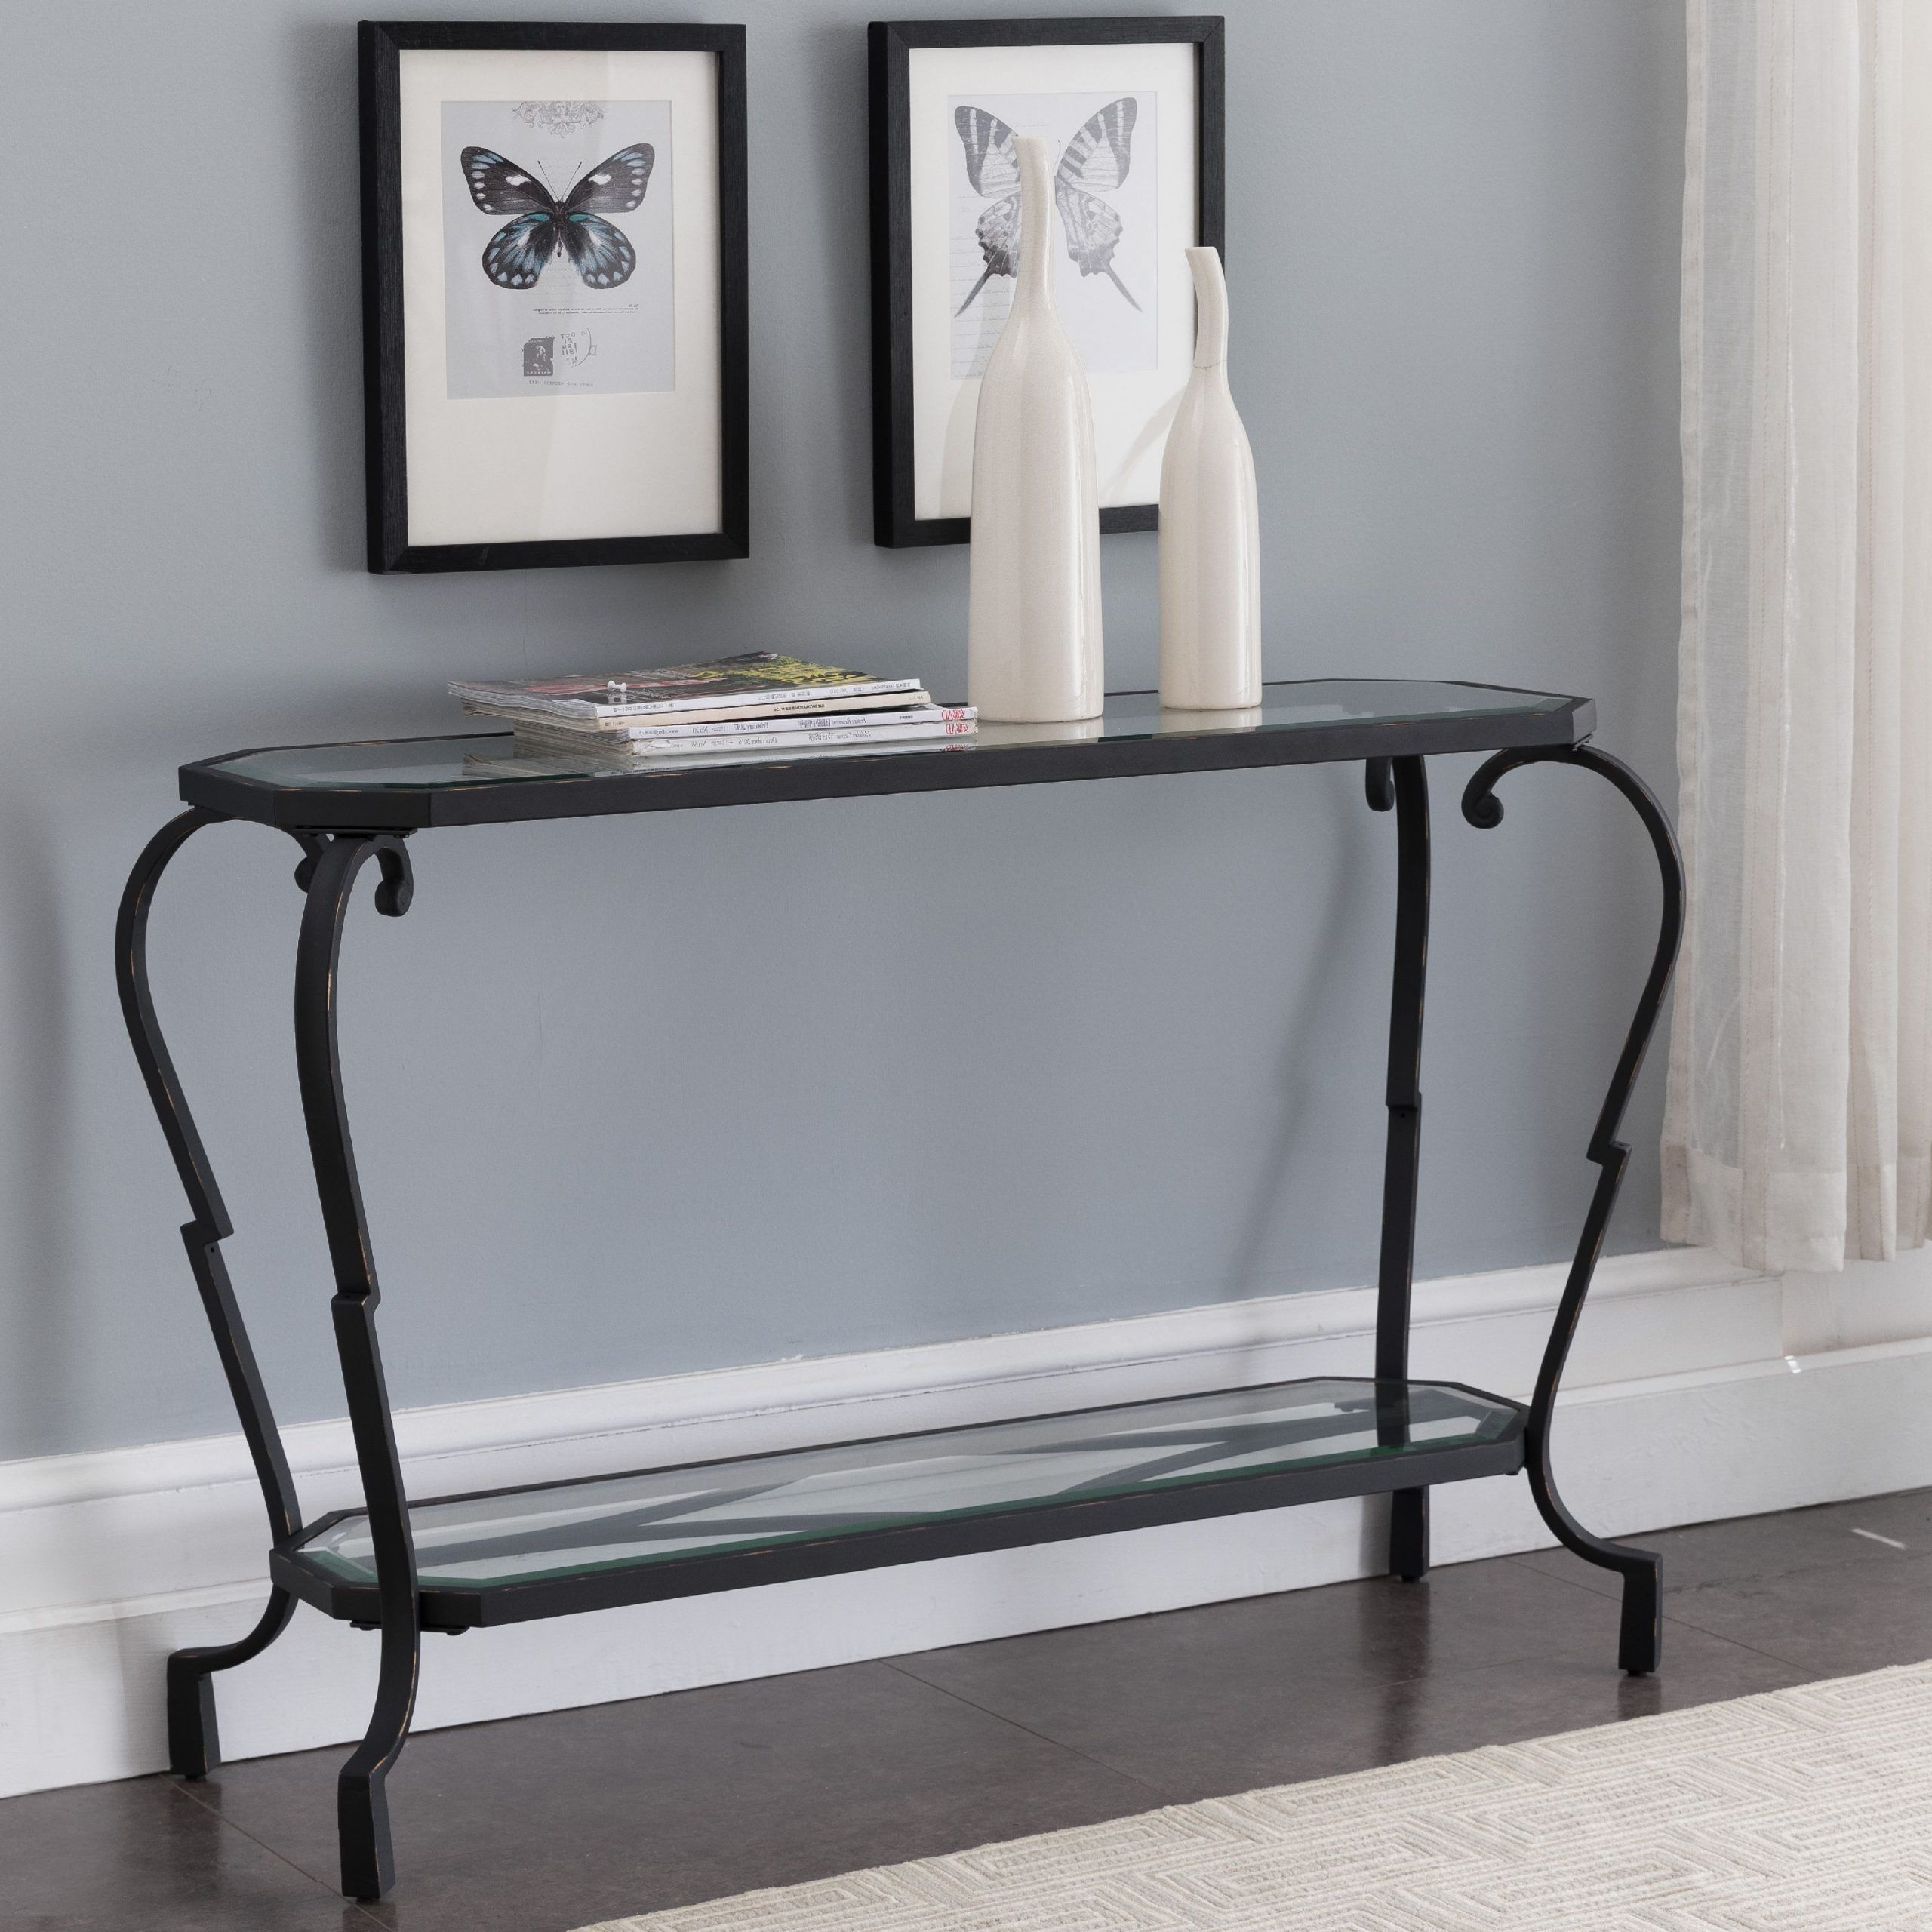 Jordan Modern Entryway Console Table, Textured Black & Brushed Copper Inside Metal Console Tables (View 5 of 20)